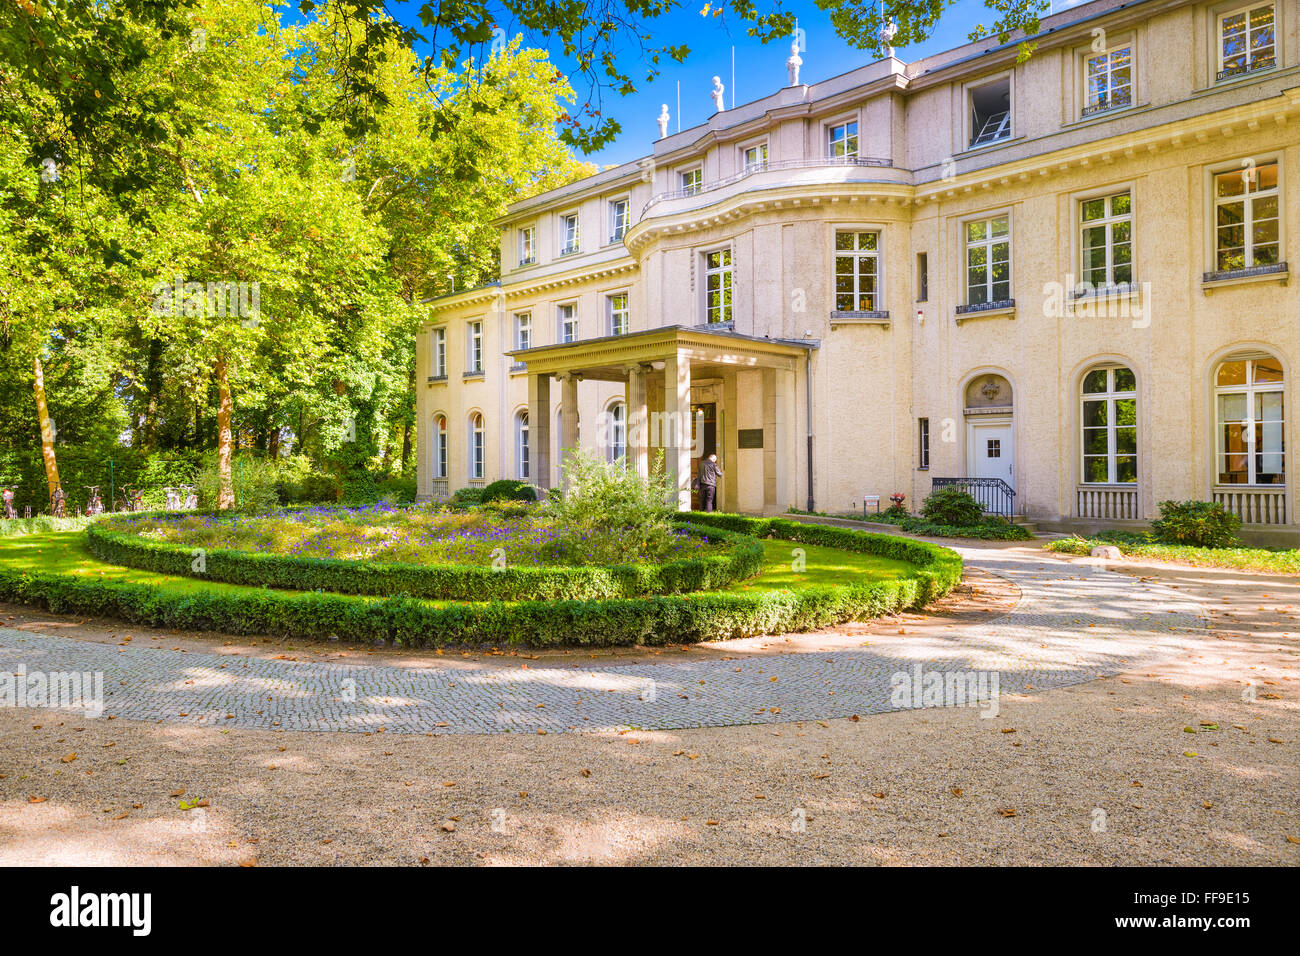 The Wannsee House in Berlin, Germany. Stock Photo